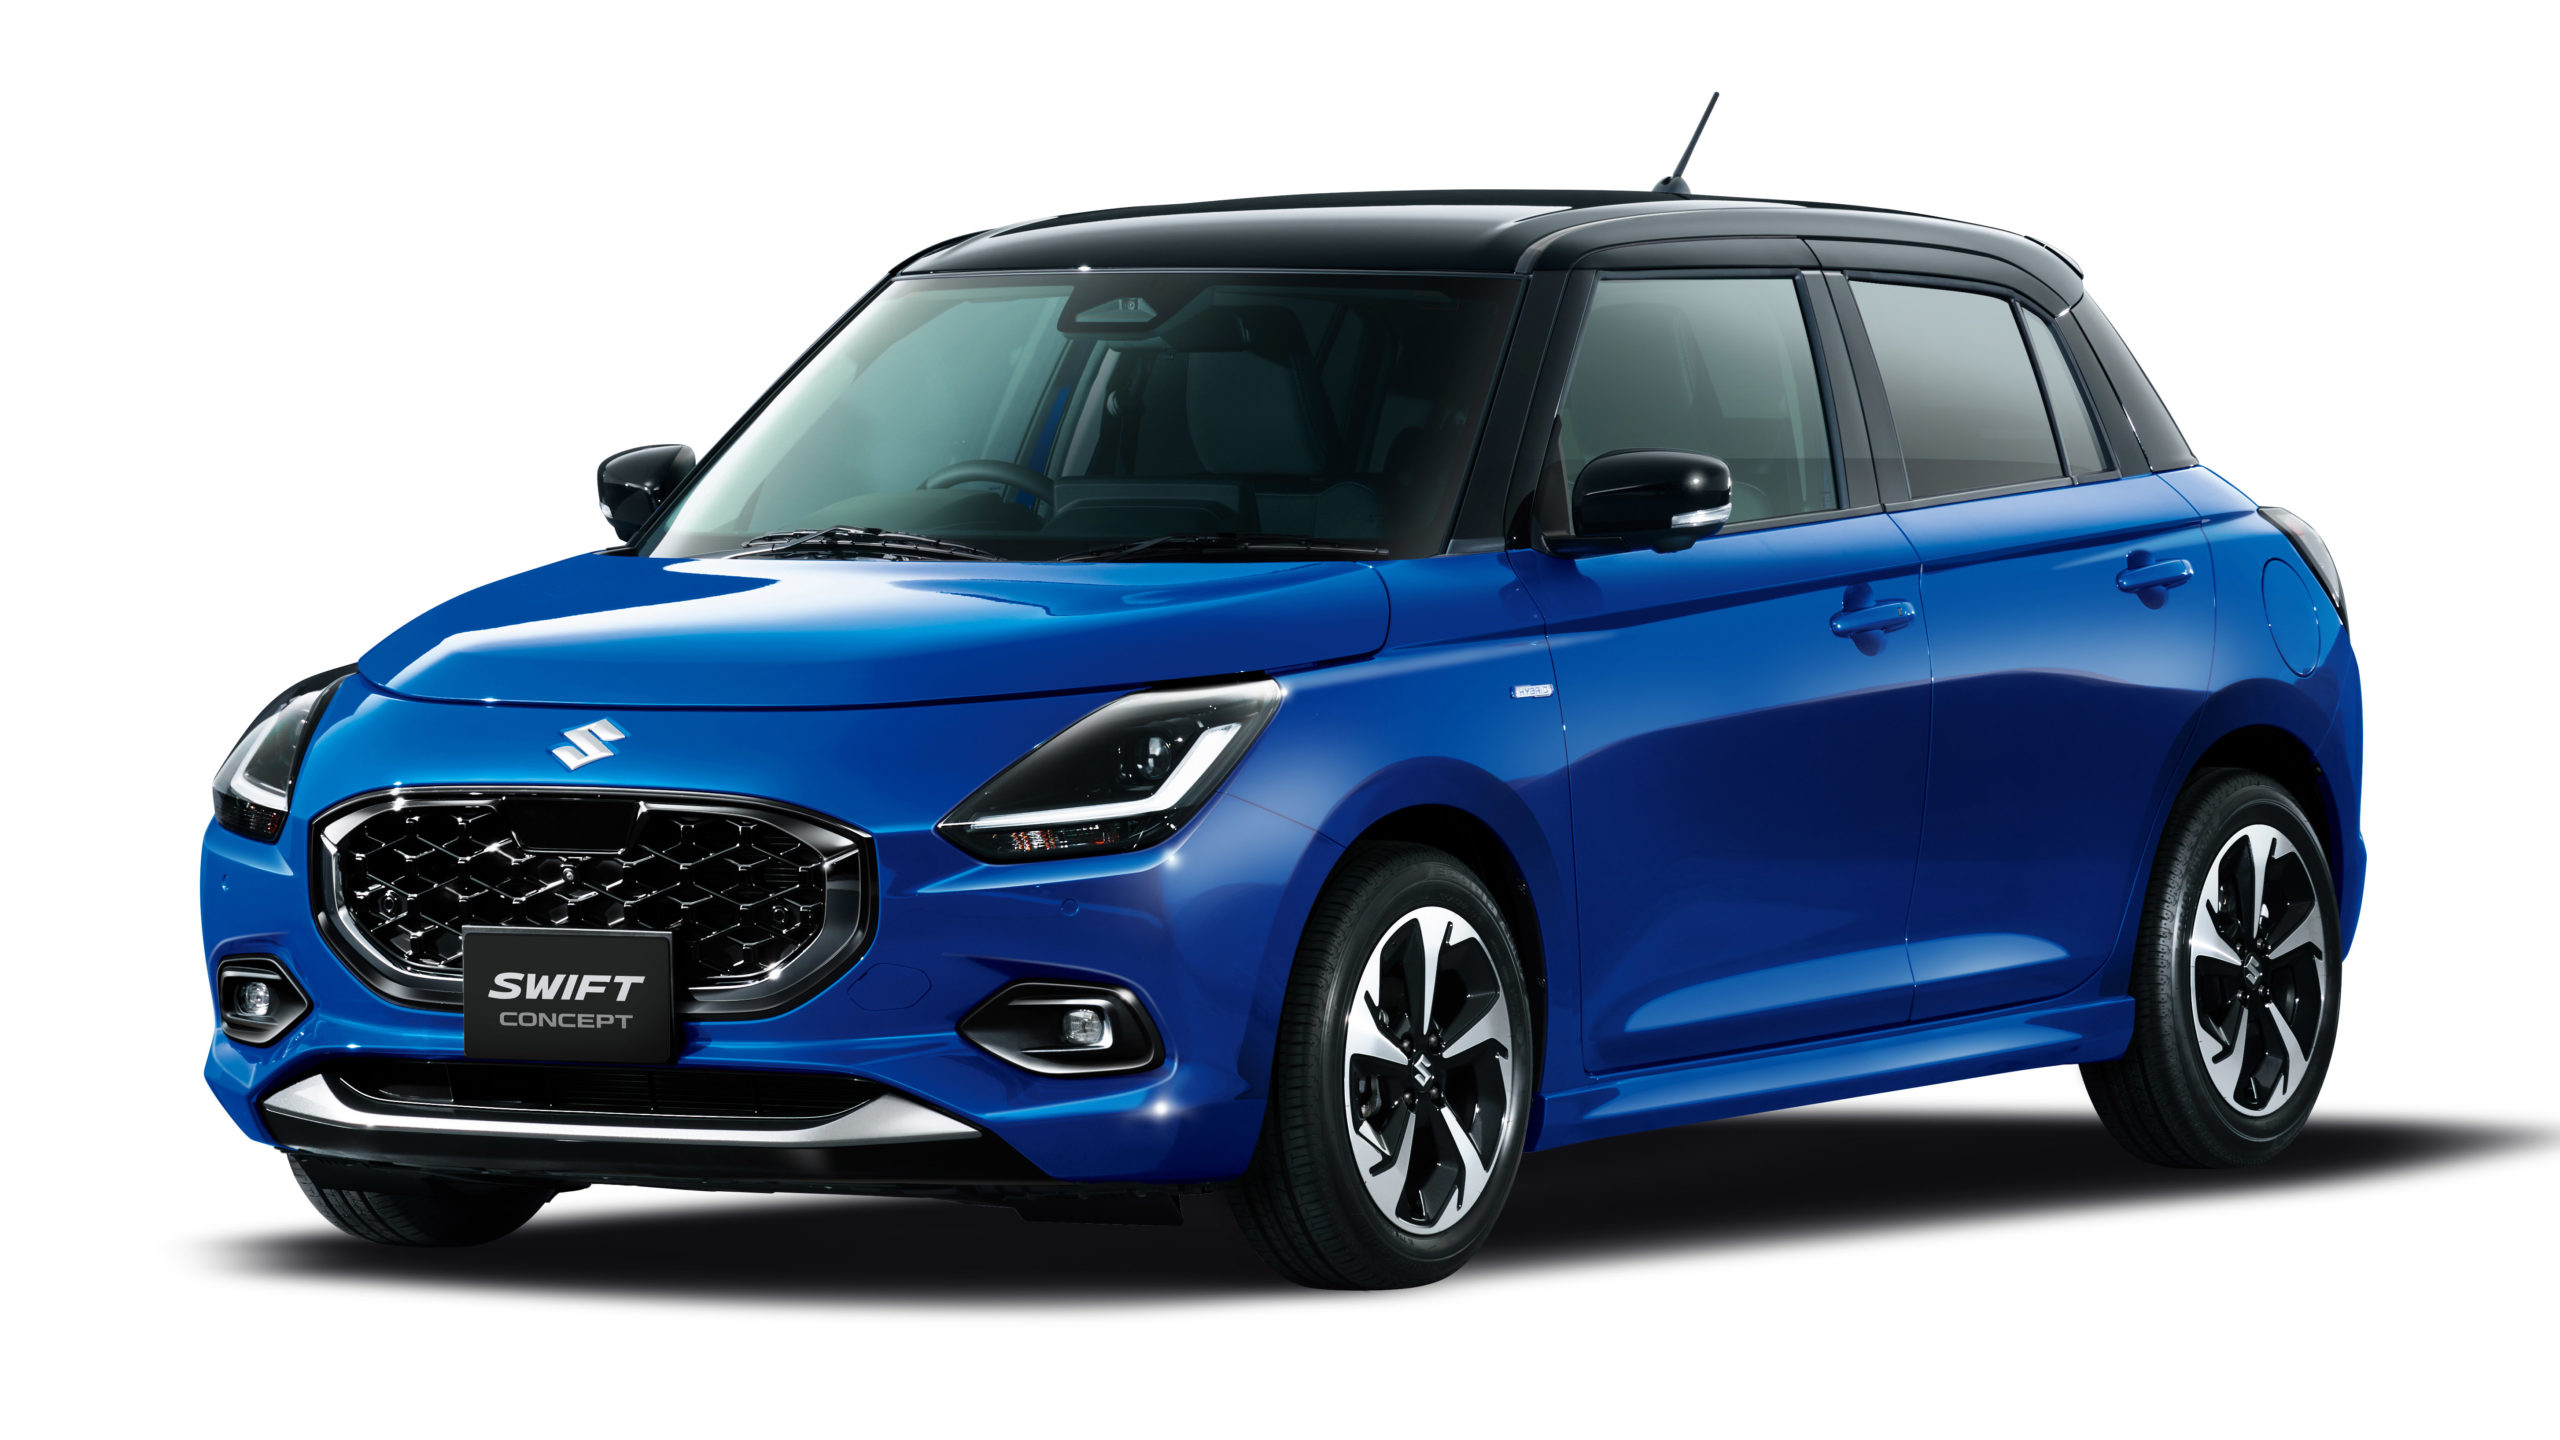 uh oh, the new suzuki swift concept is not a looker